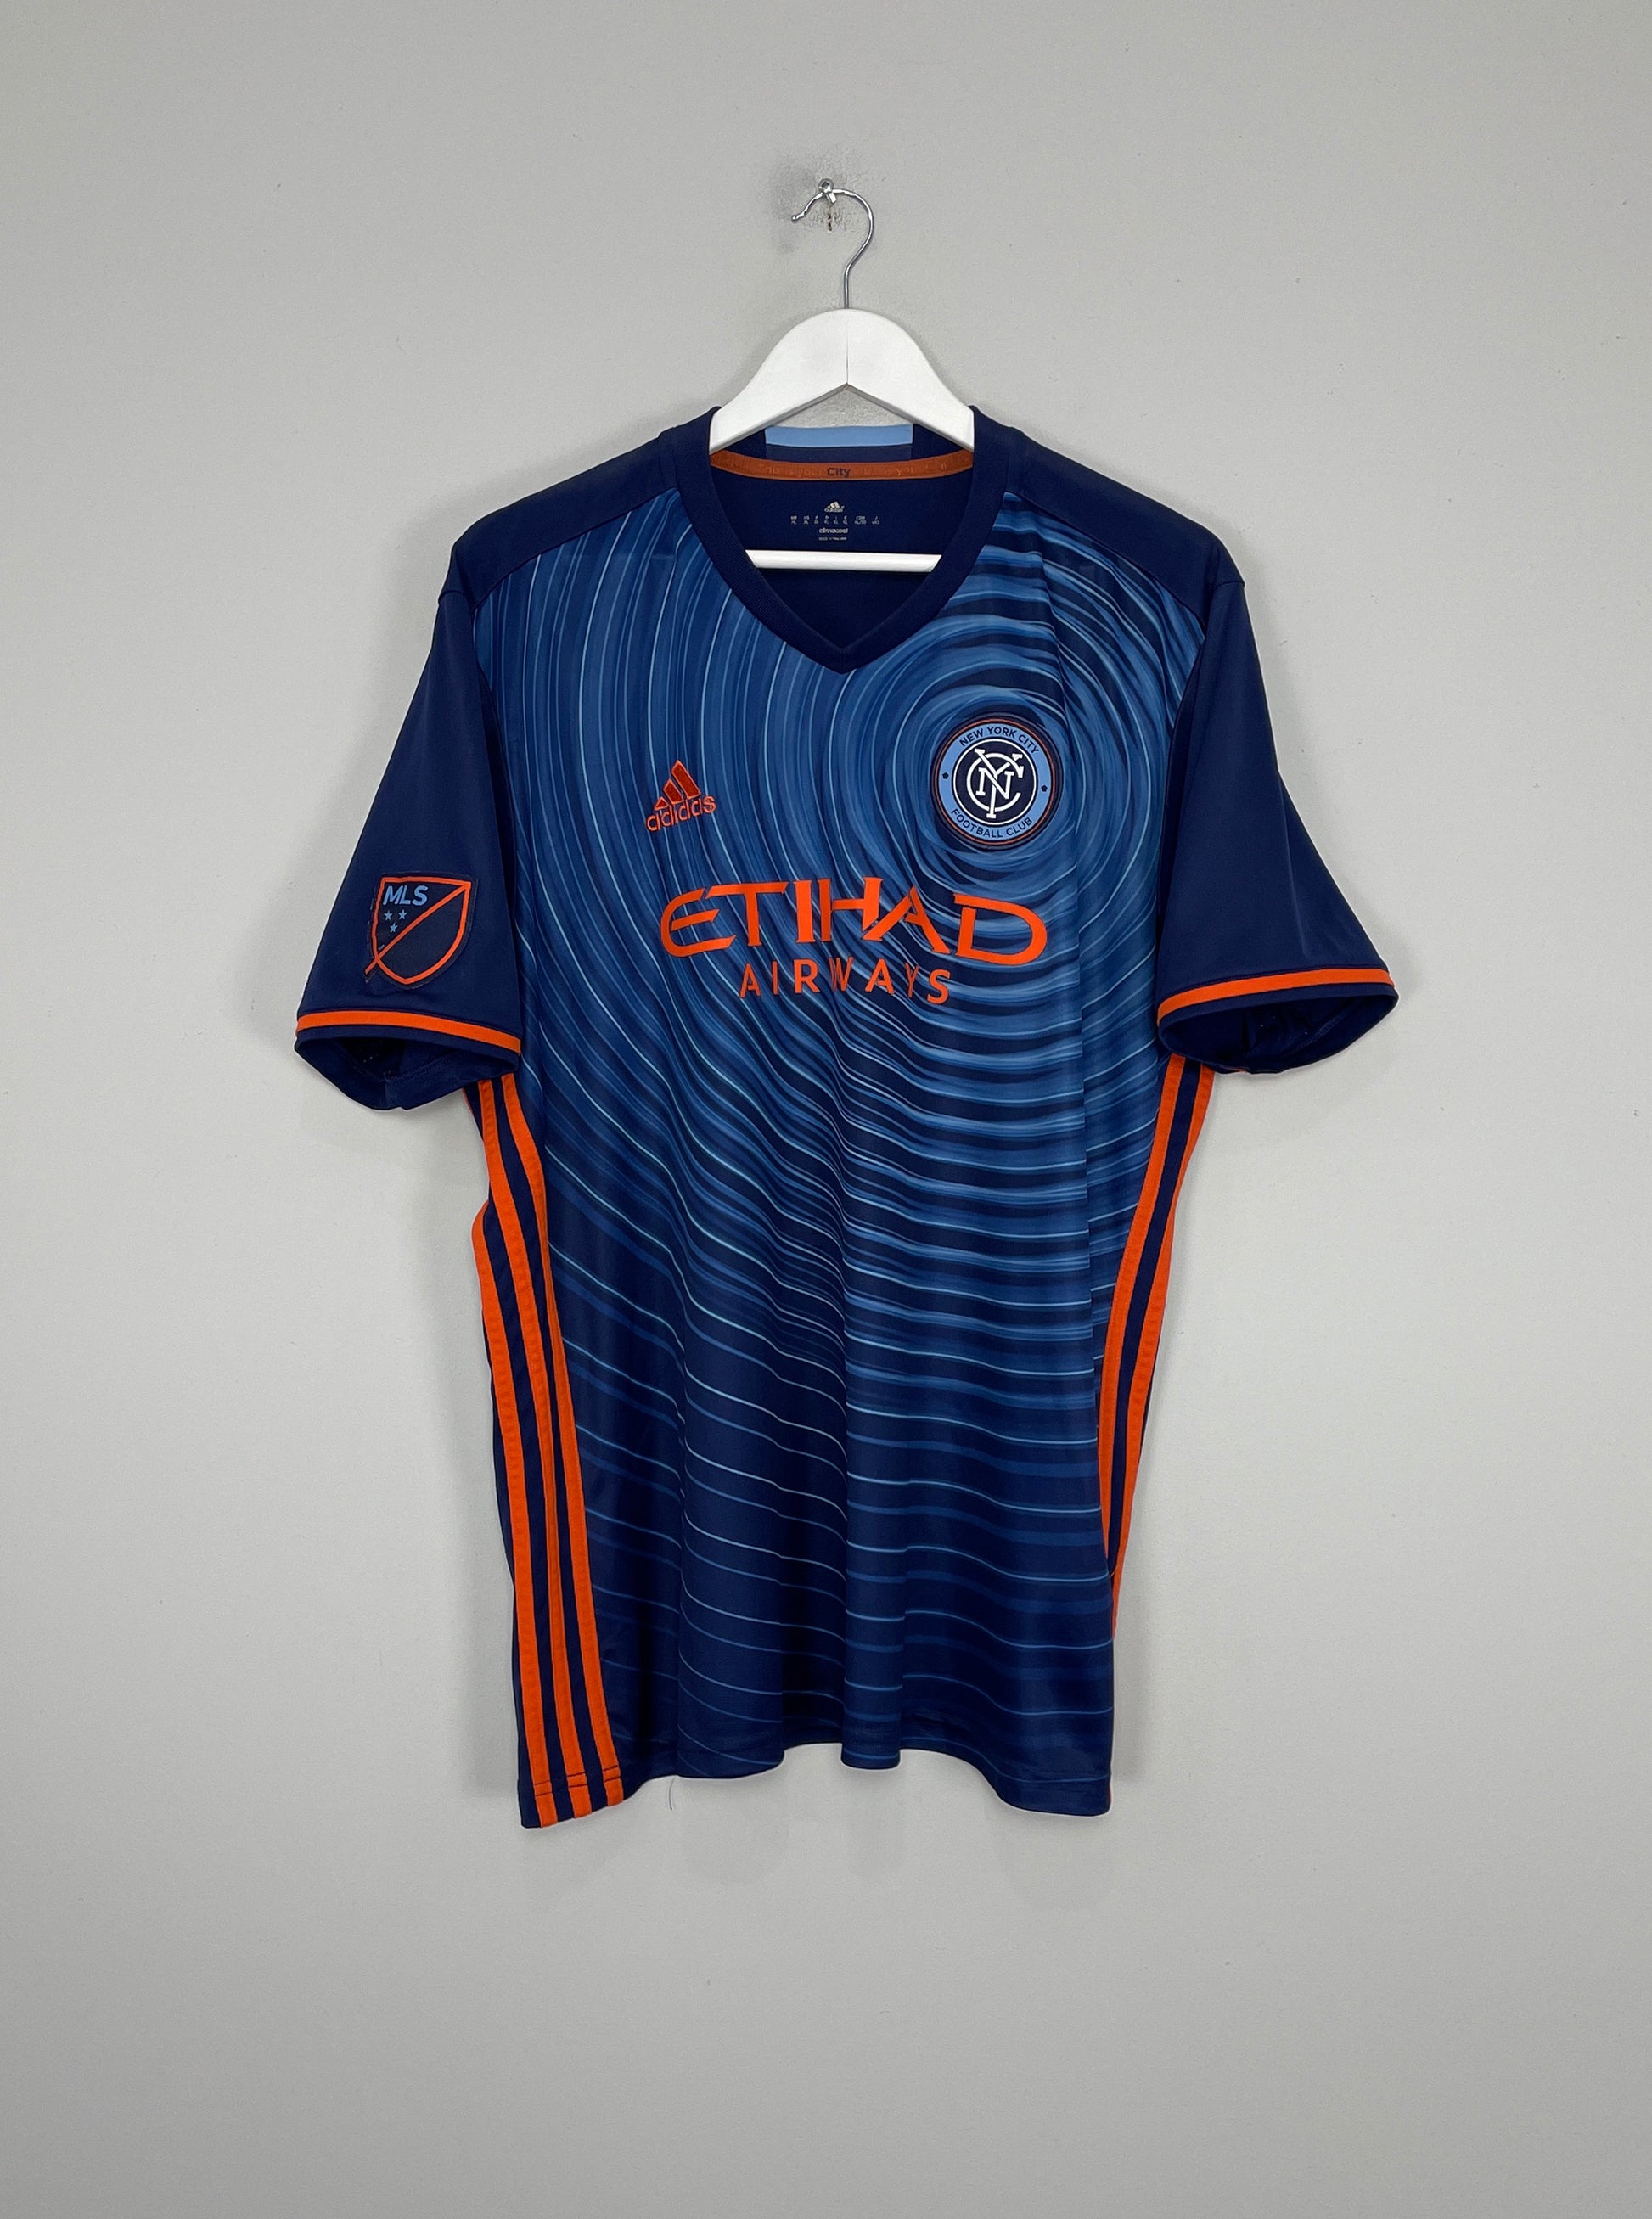 Image of the New York City shirt from the 2016/17 season